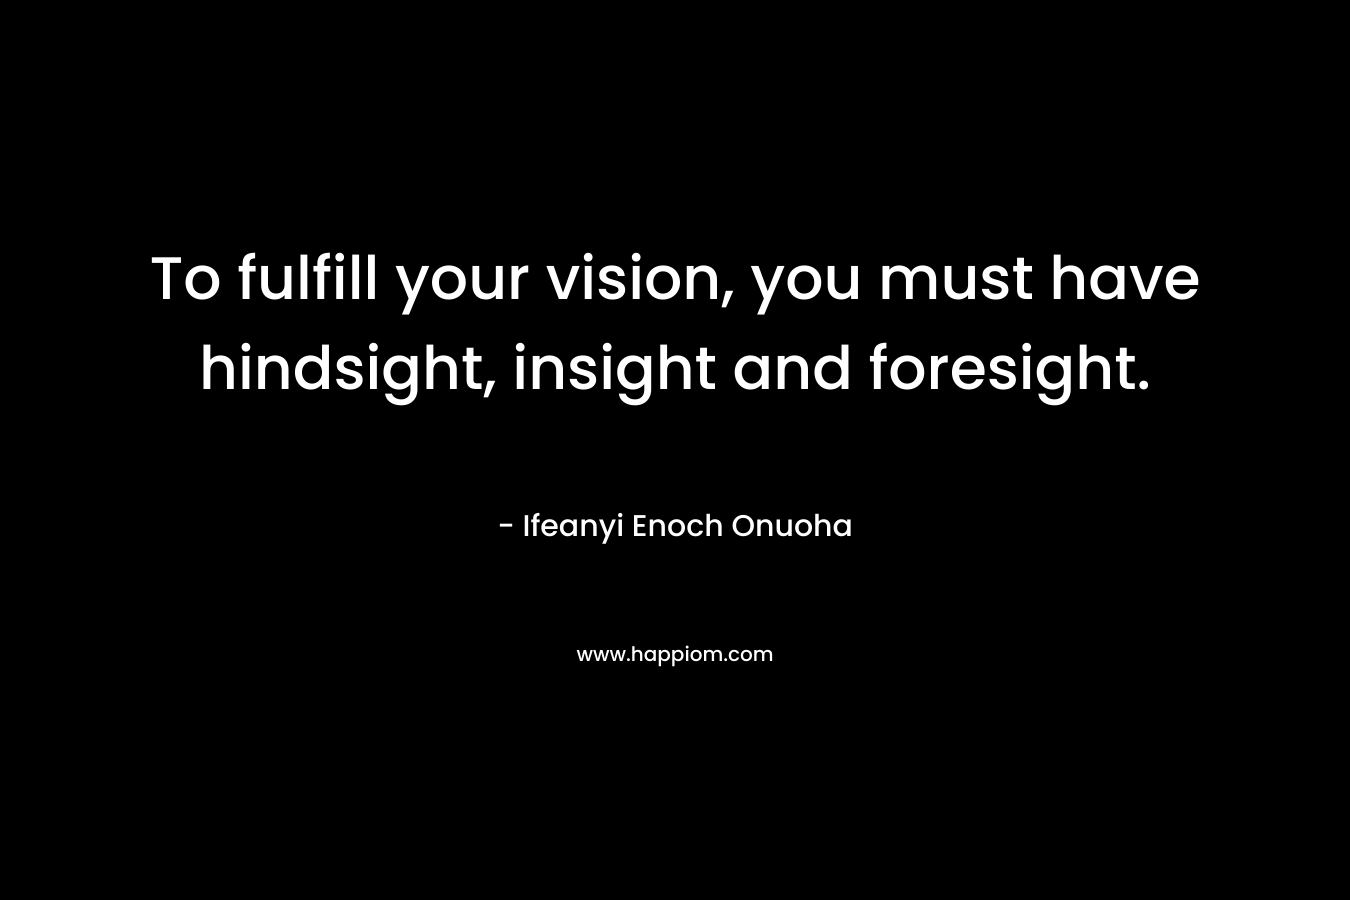 To fulfill your vision, you must have hindsight, insight and foresight. – Ifeanyi Enoch Onuoha